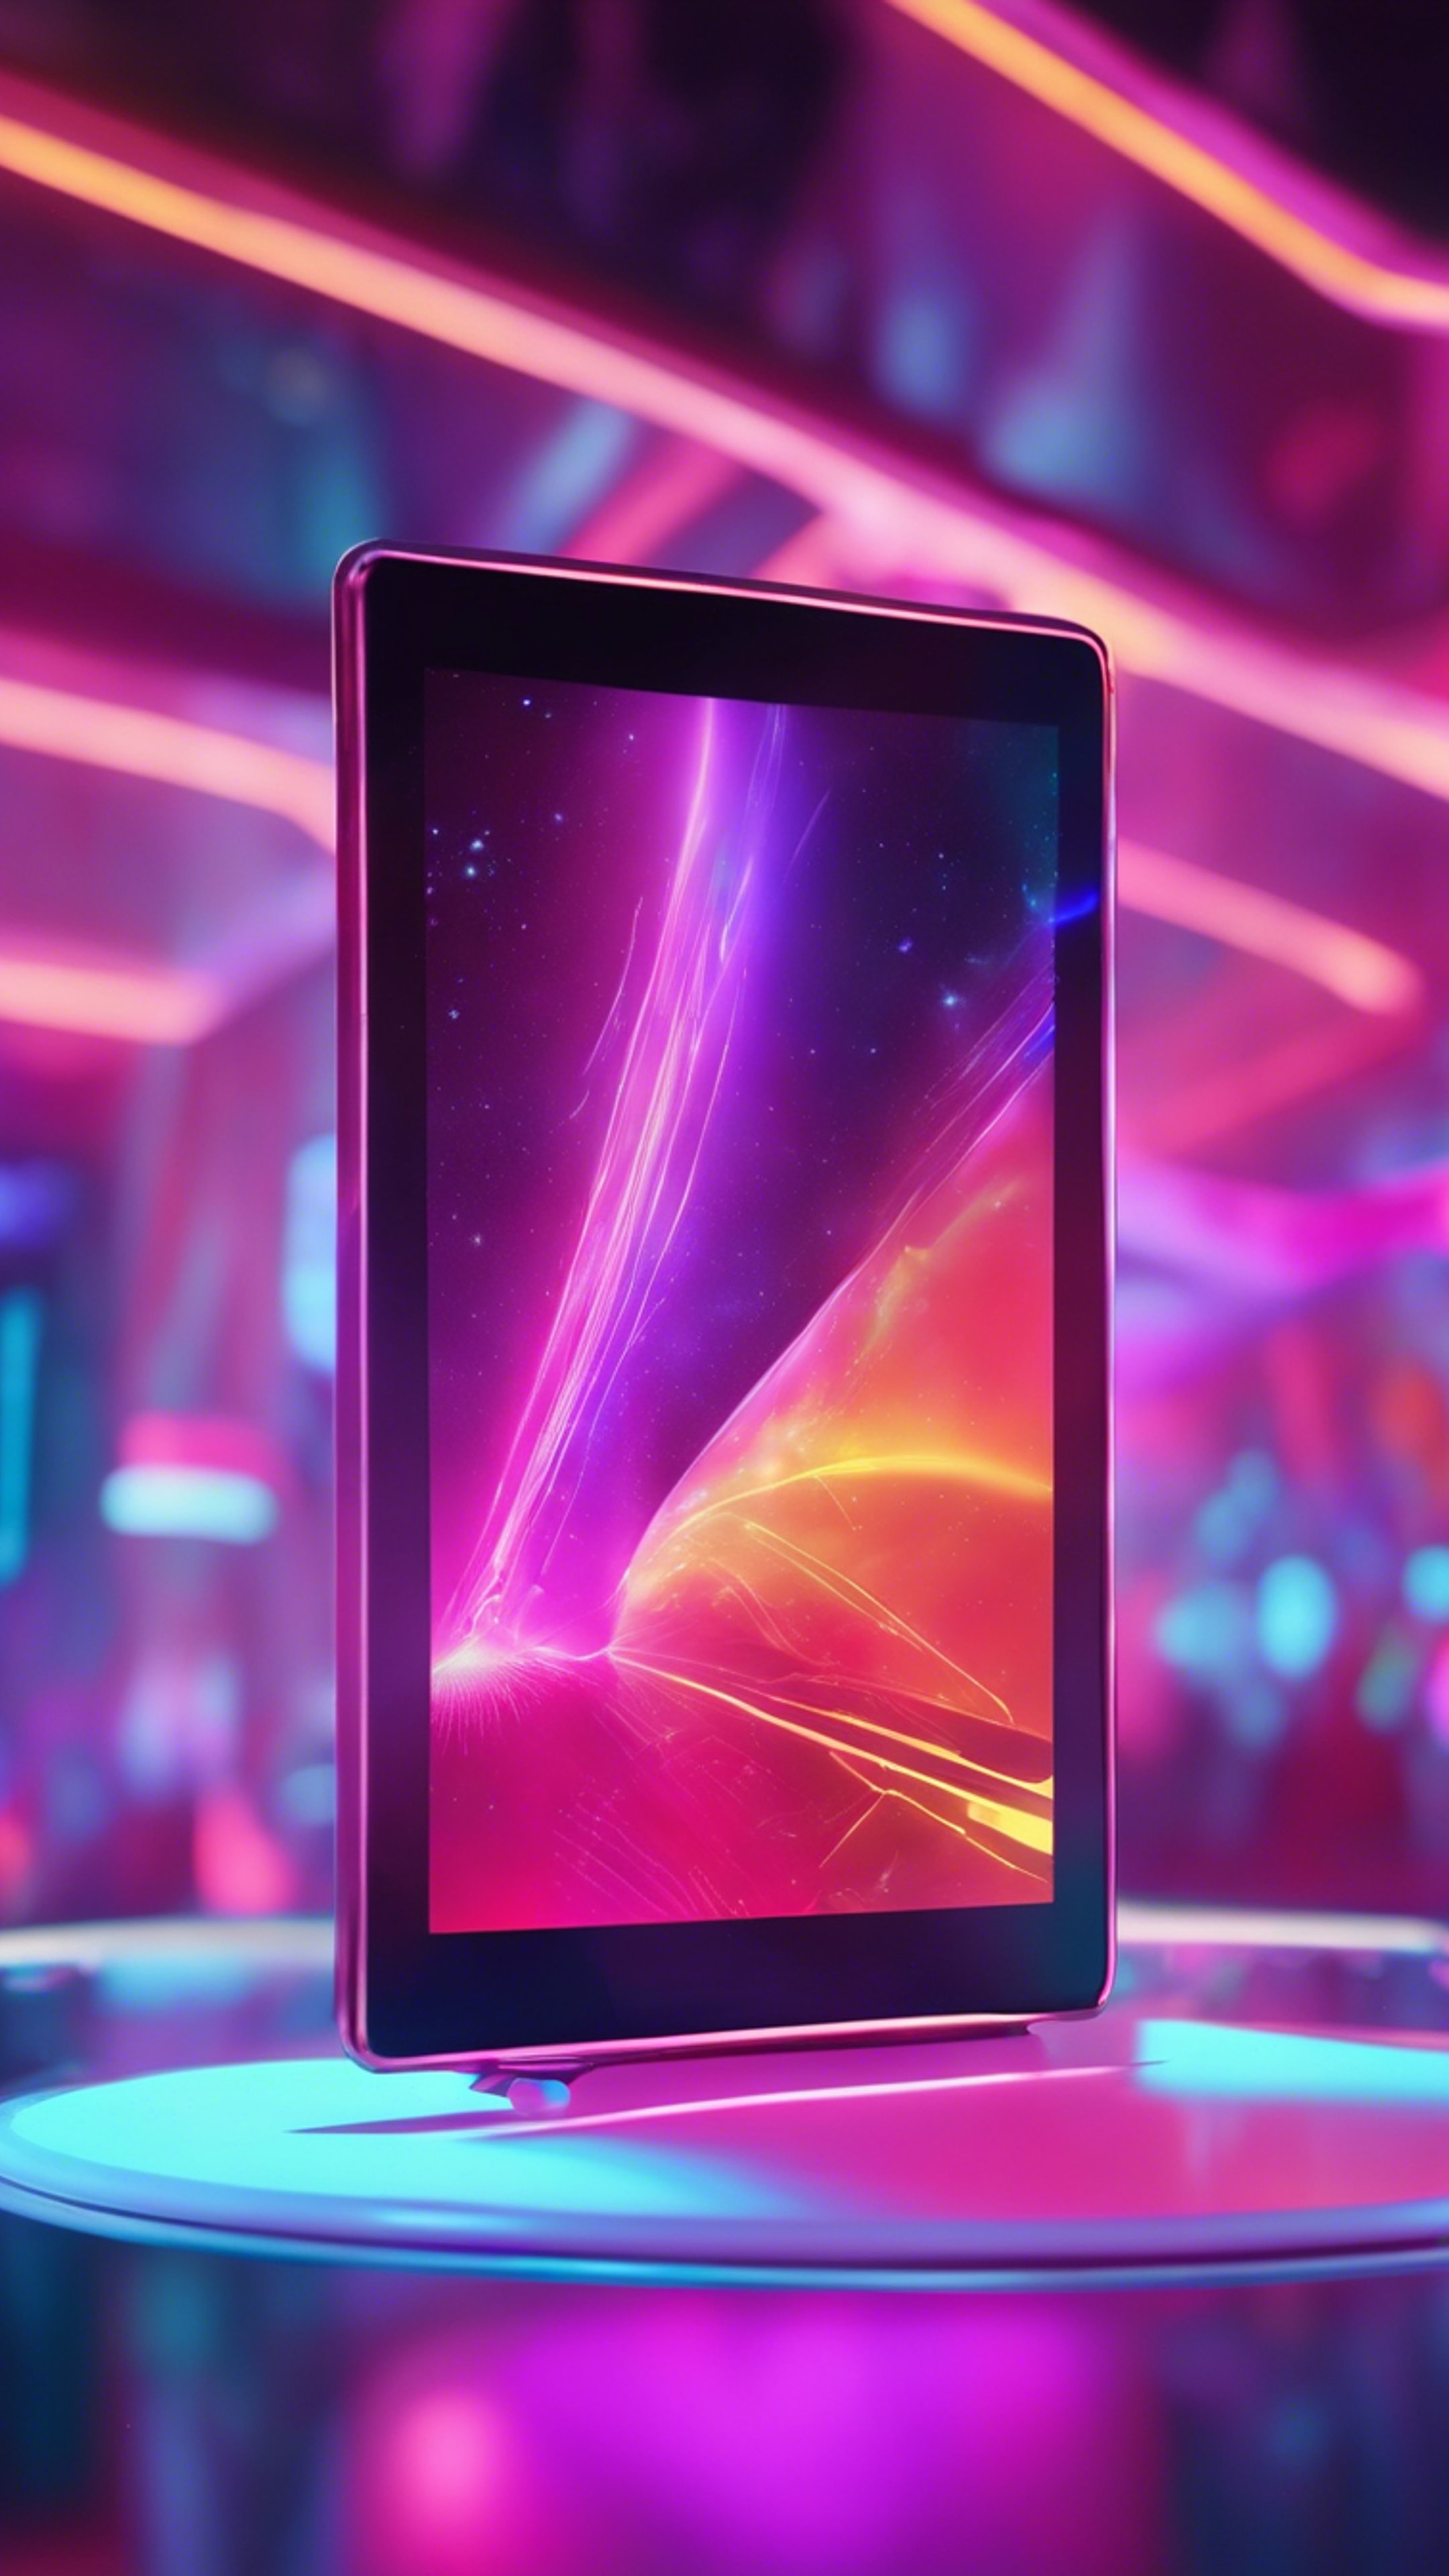 An ultra-modern tablet with a holographic touch screen floating in a futuristic, vividly colored neon environment. Taustakuva[25bfd648fdfb4eaf80d5]